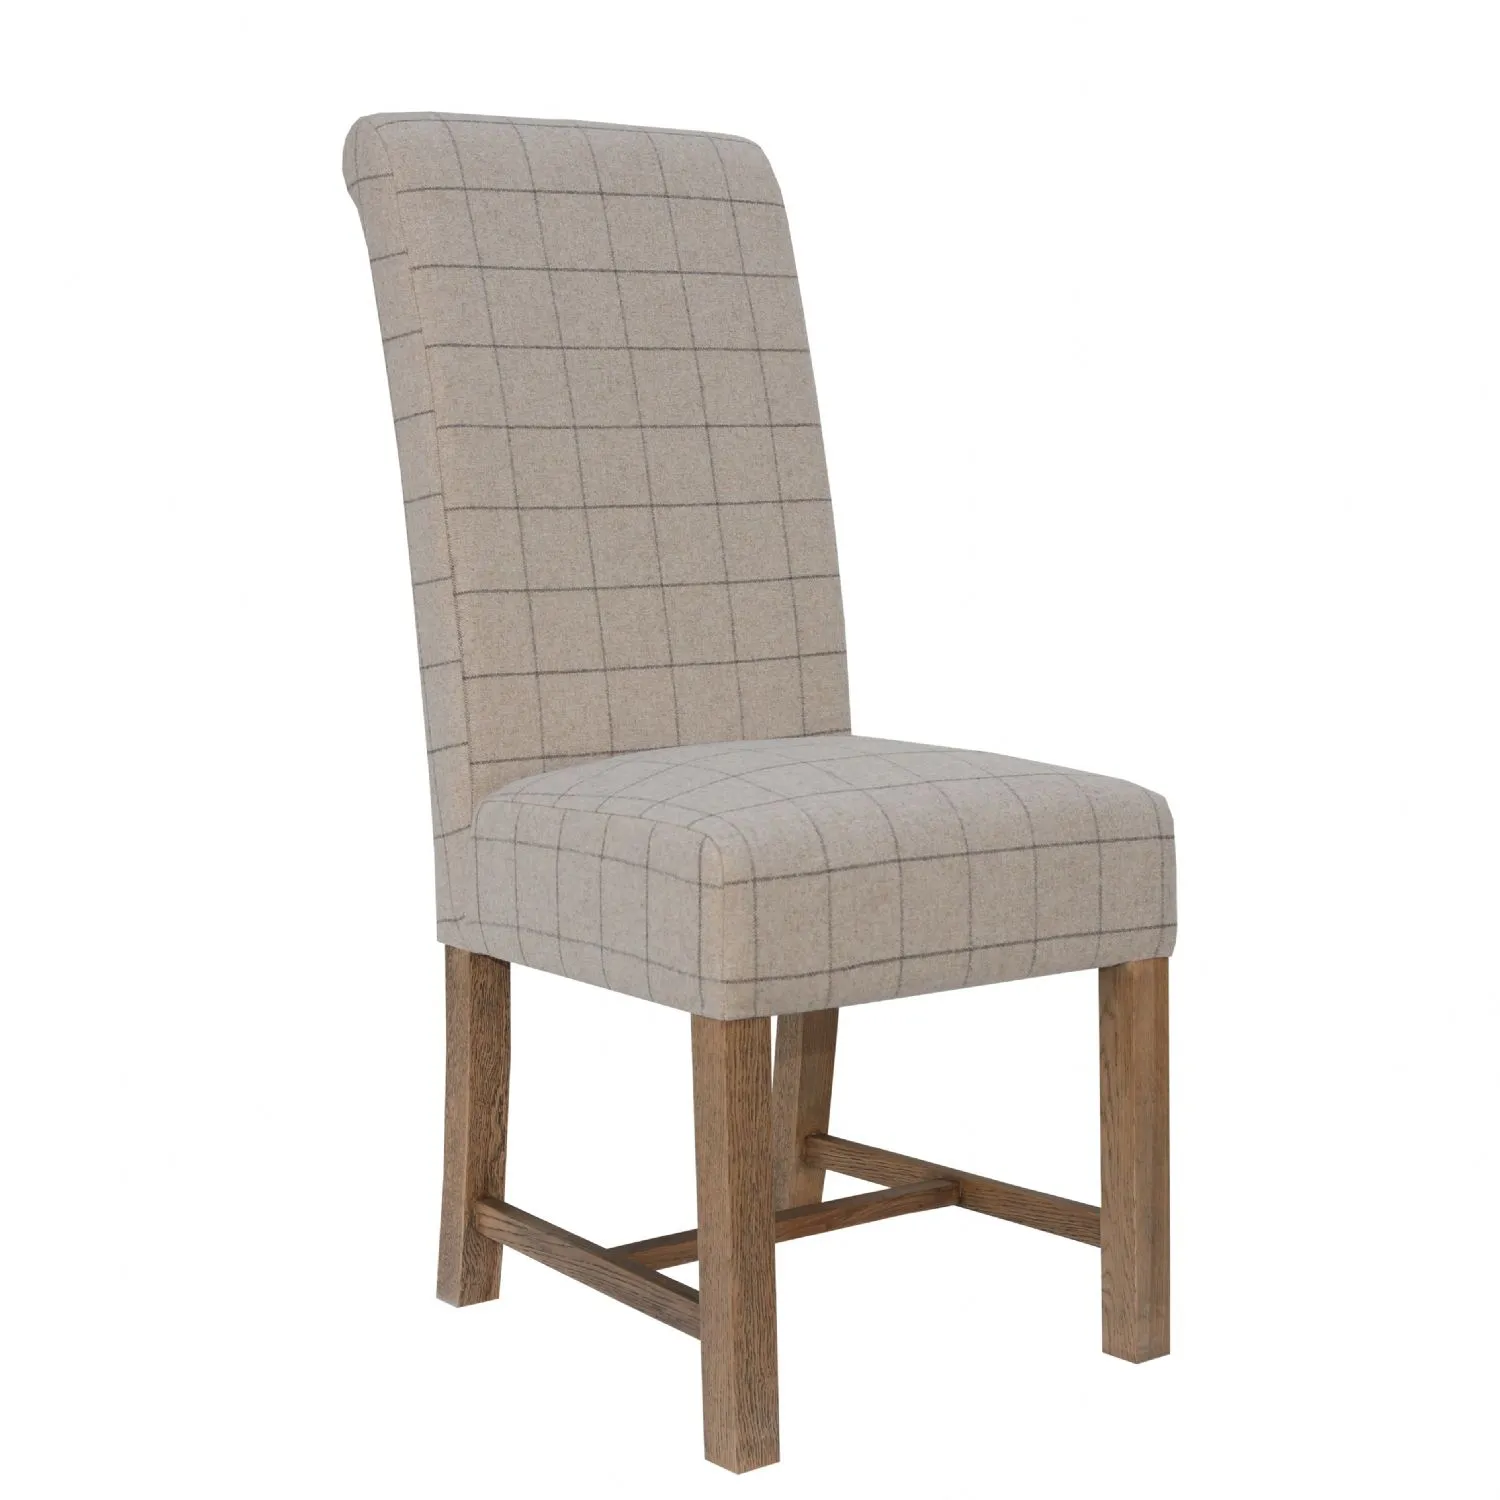 The Chair Collection Scroll Back Dining Chair Check Natural Wool